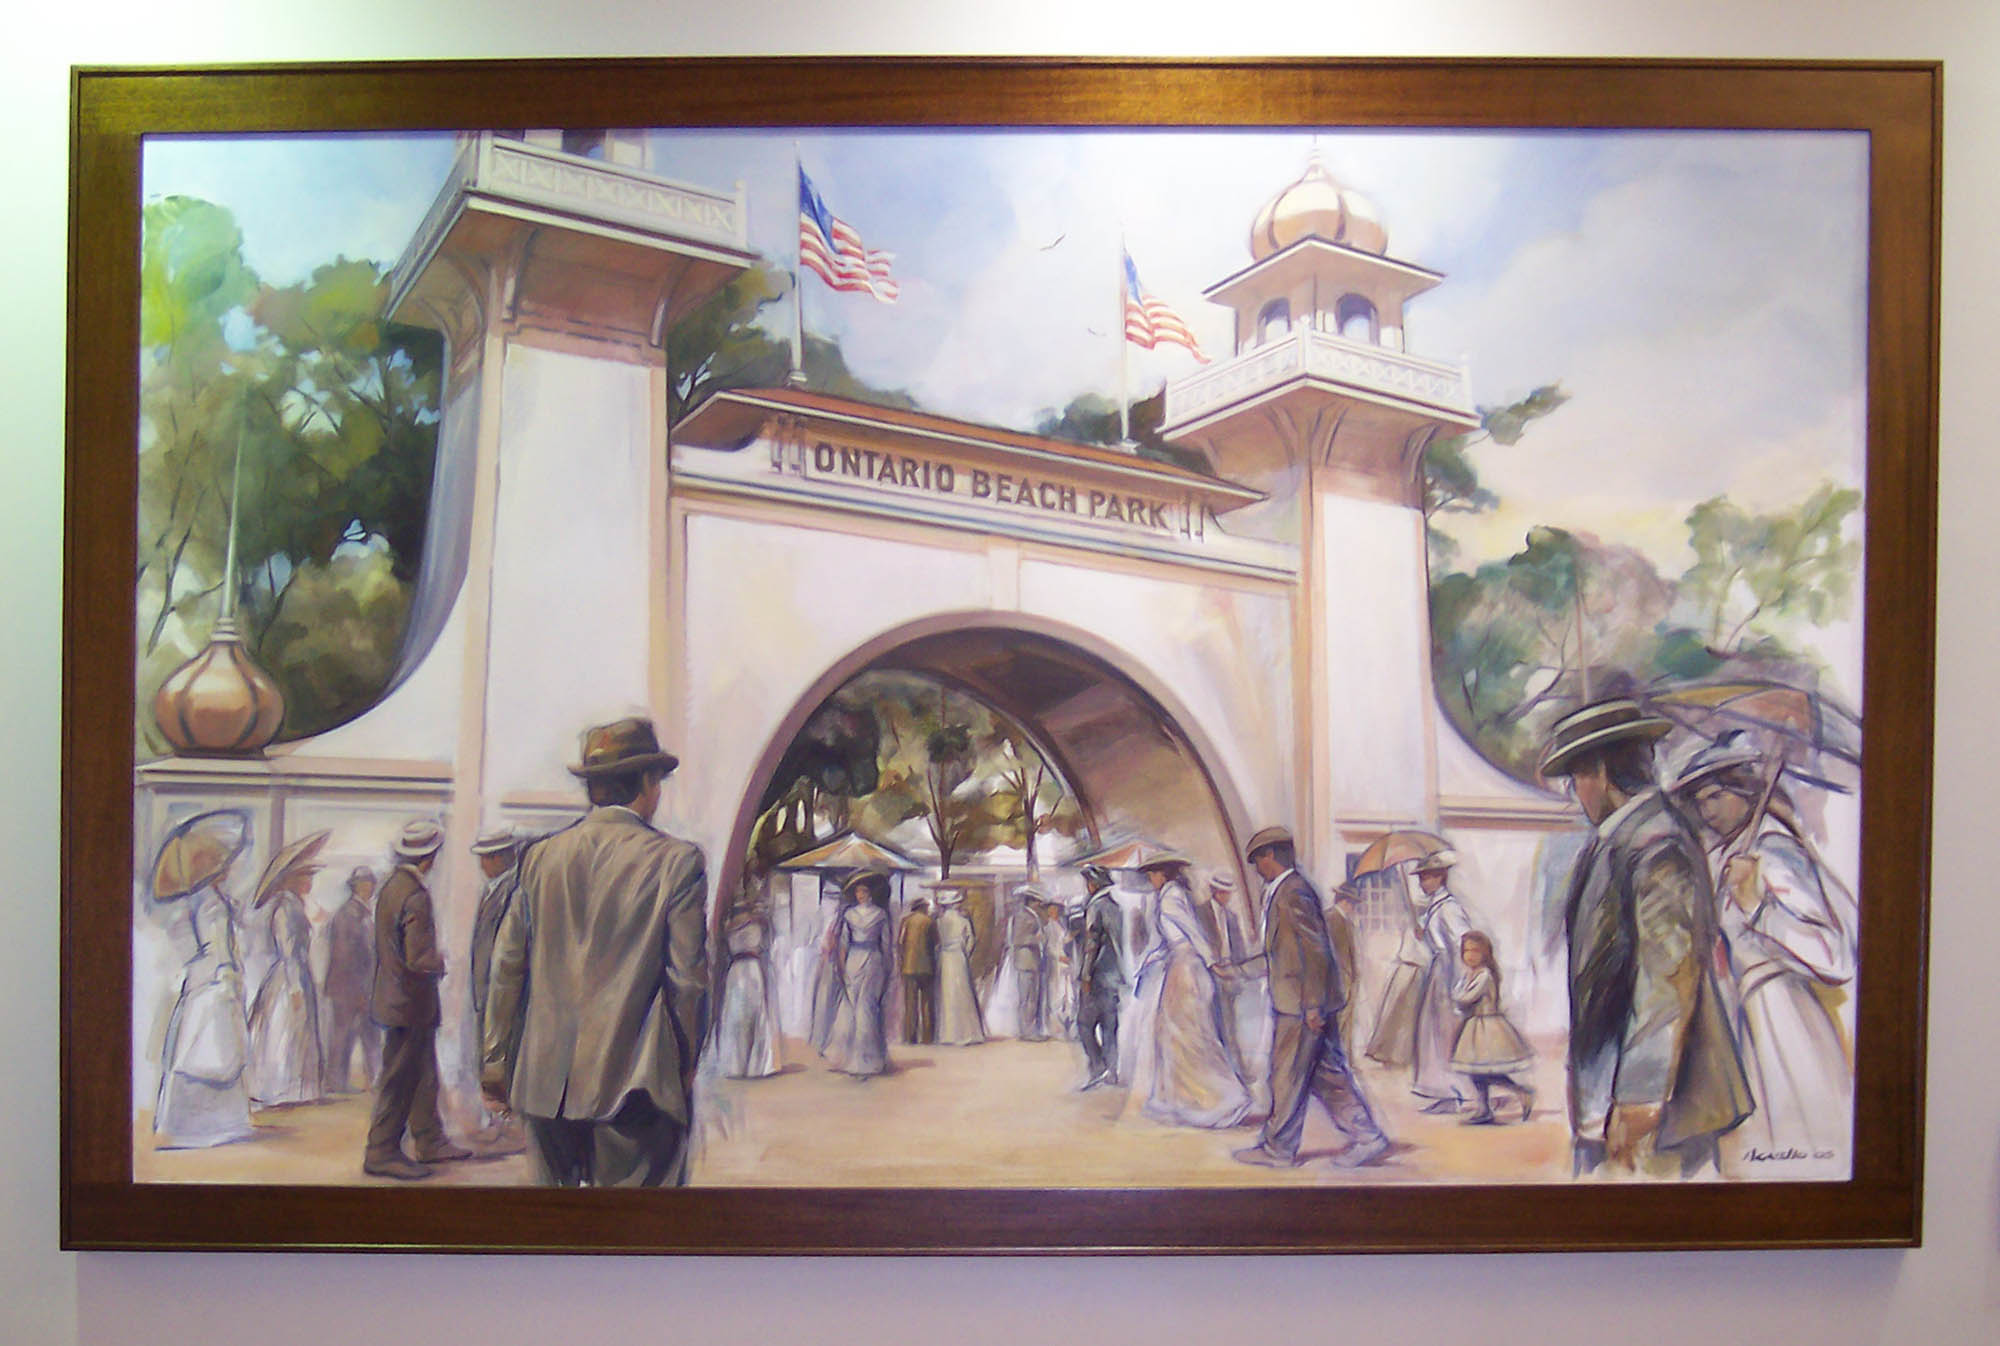 Painting of Ontario Beach Park Entrance